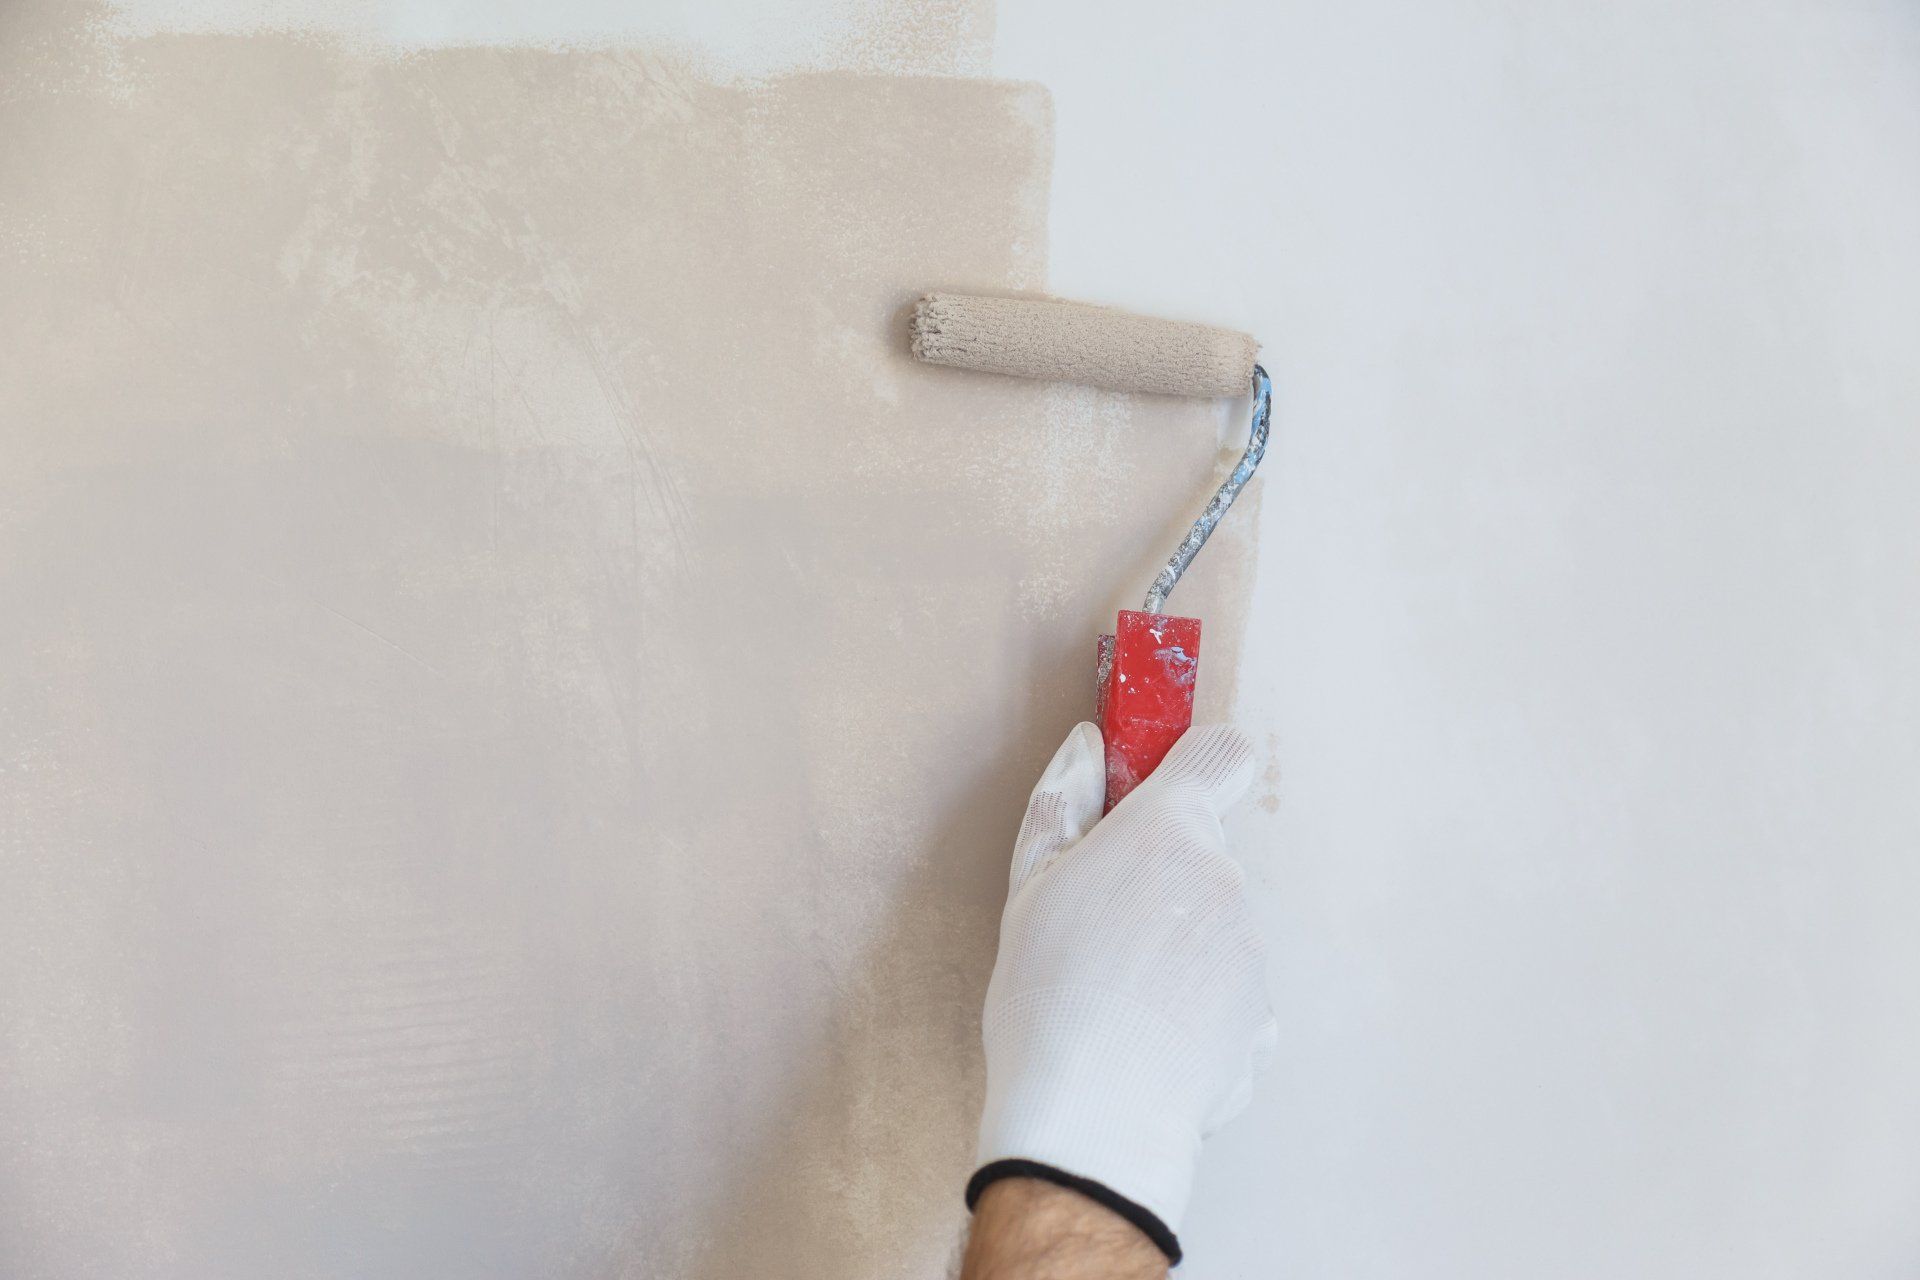 Painting Jobs in London